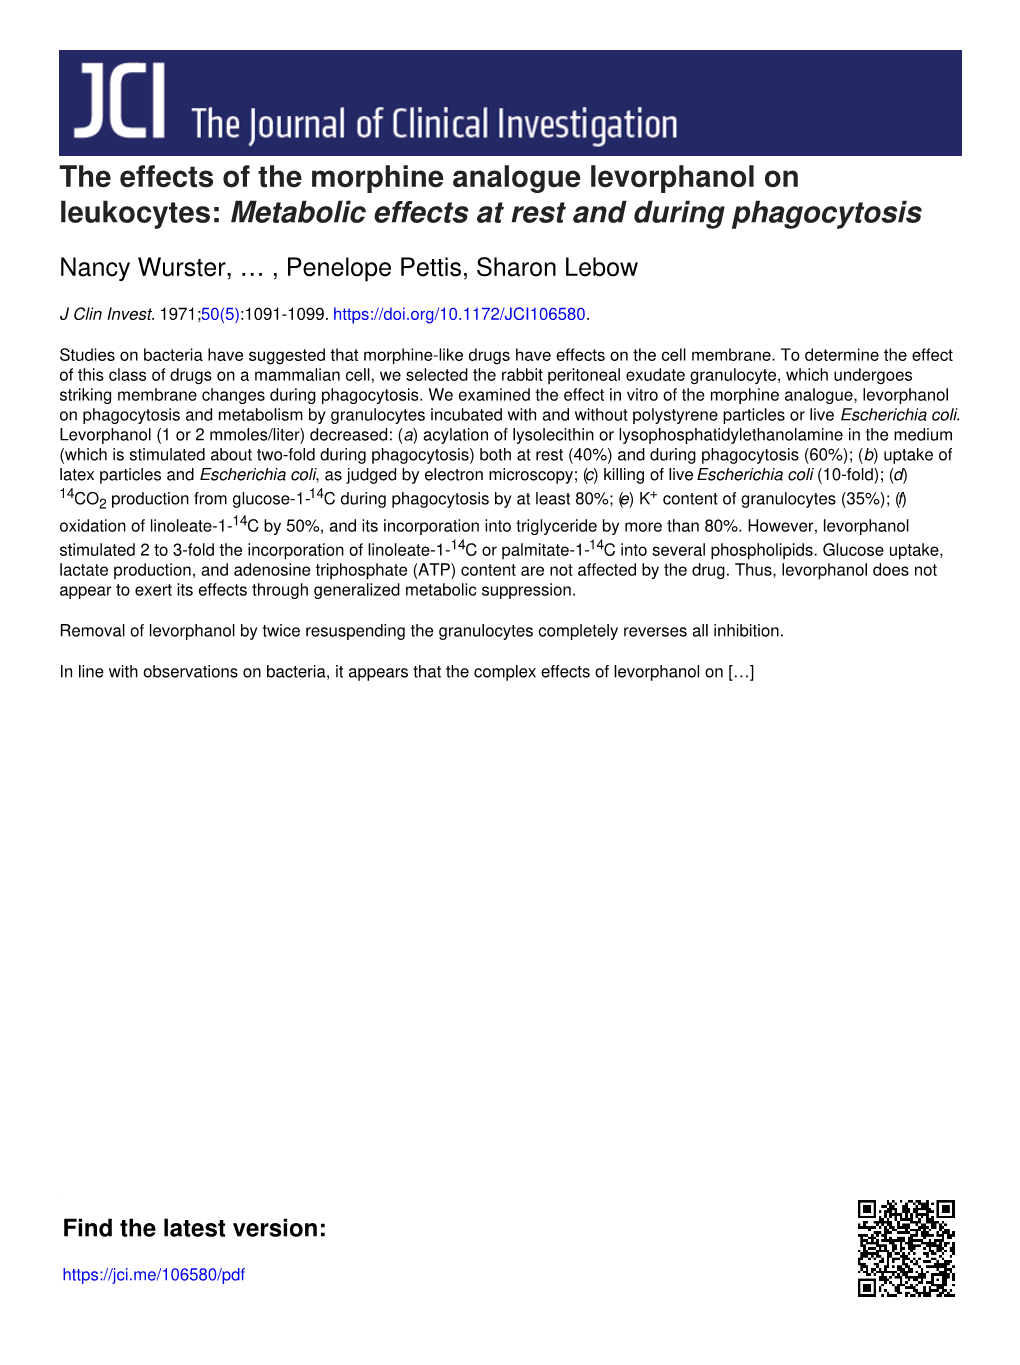 The Effects of the Morphine Analogue Levorphanol on Leukocytes: Metabolic Effects at Rest and During Phagocytosis